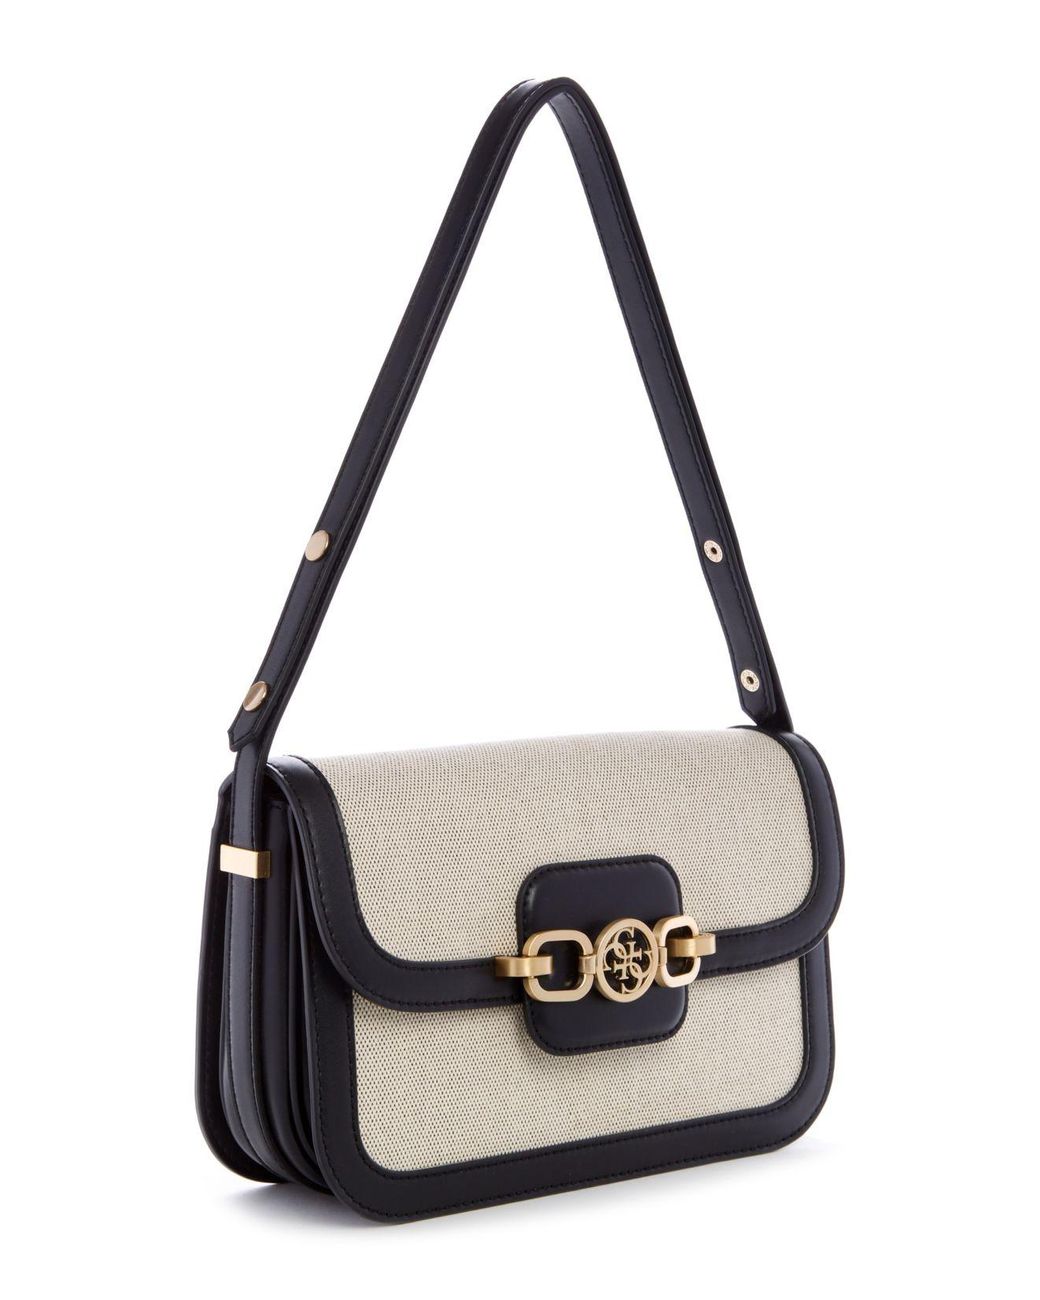 Guess Hensely Canvas Convertible Shoulder Bag in Metallic | Lyst